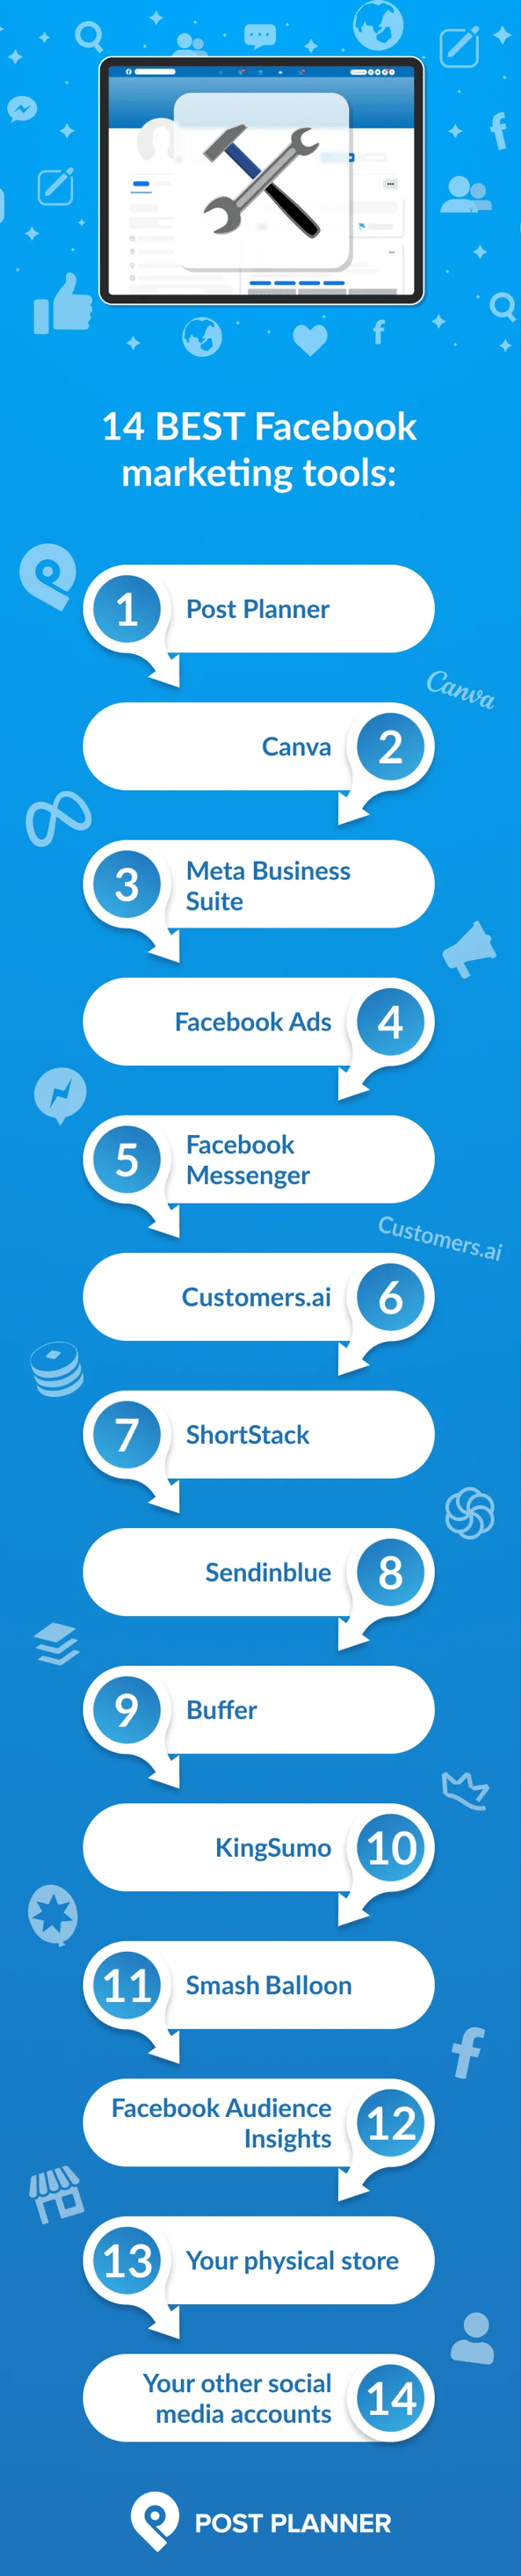 14 of the Best Facebook Tools for Marketing